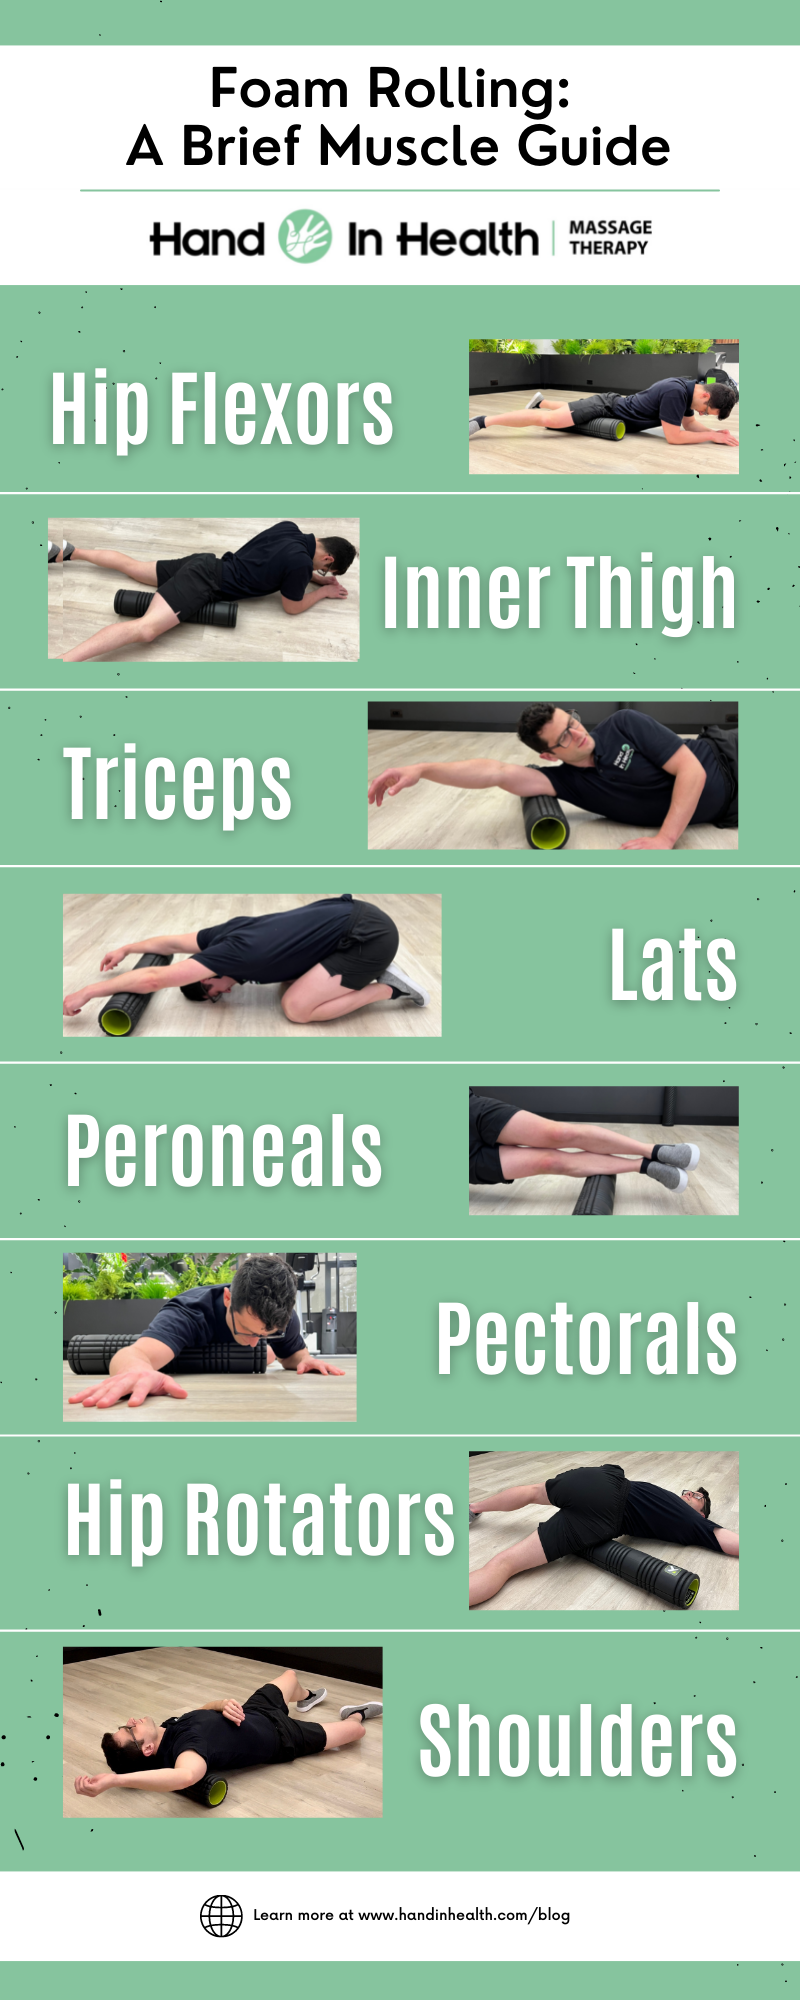 A Muscle Guide to Foam Rolling from a Massage Therapist and Personal Trainer